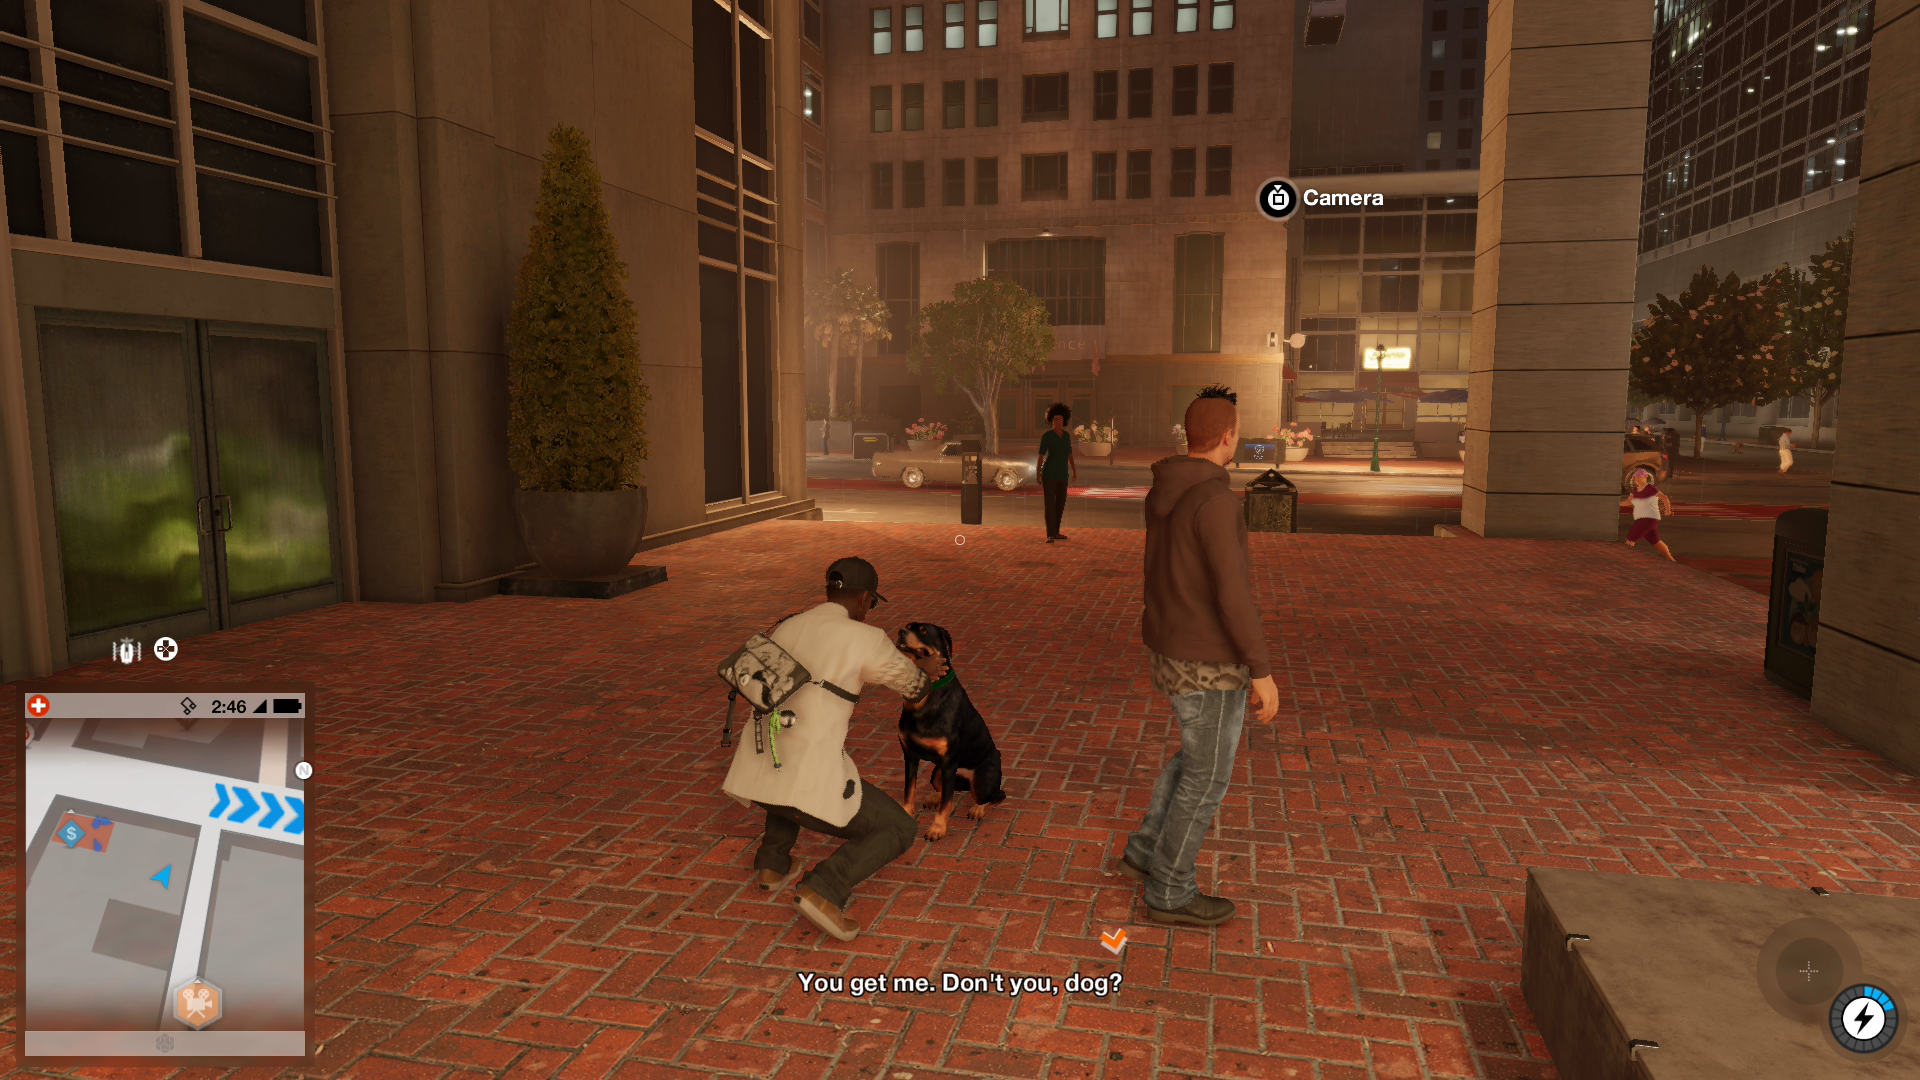 Watch Dogs: LEGION - 40 Minutes Gameplay Demo (E3 2019) @ 1080p